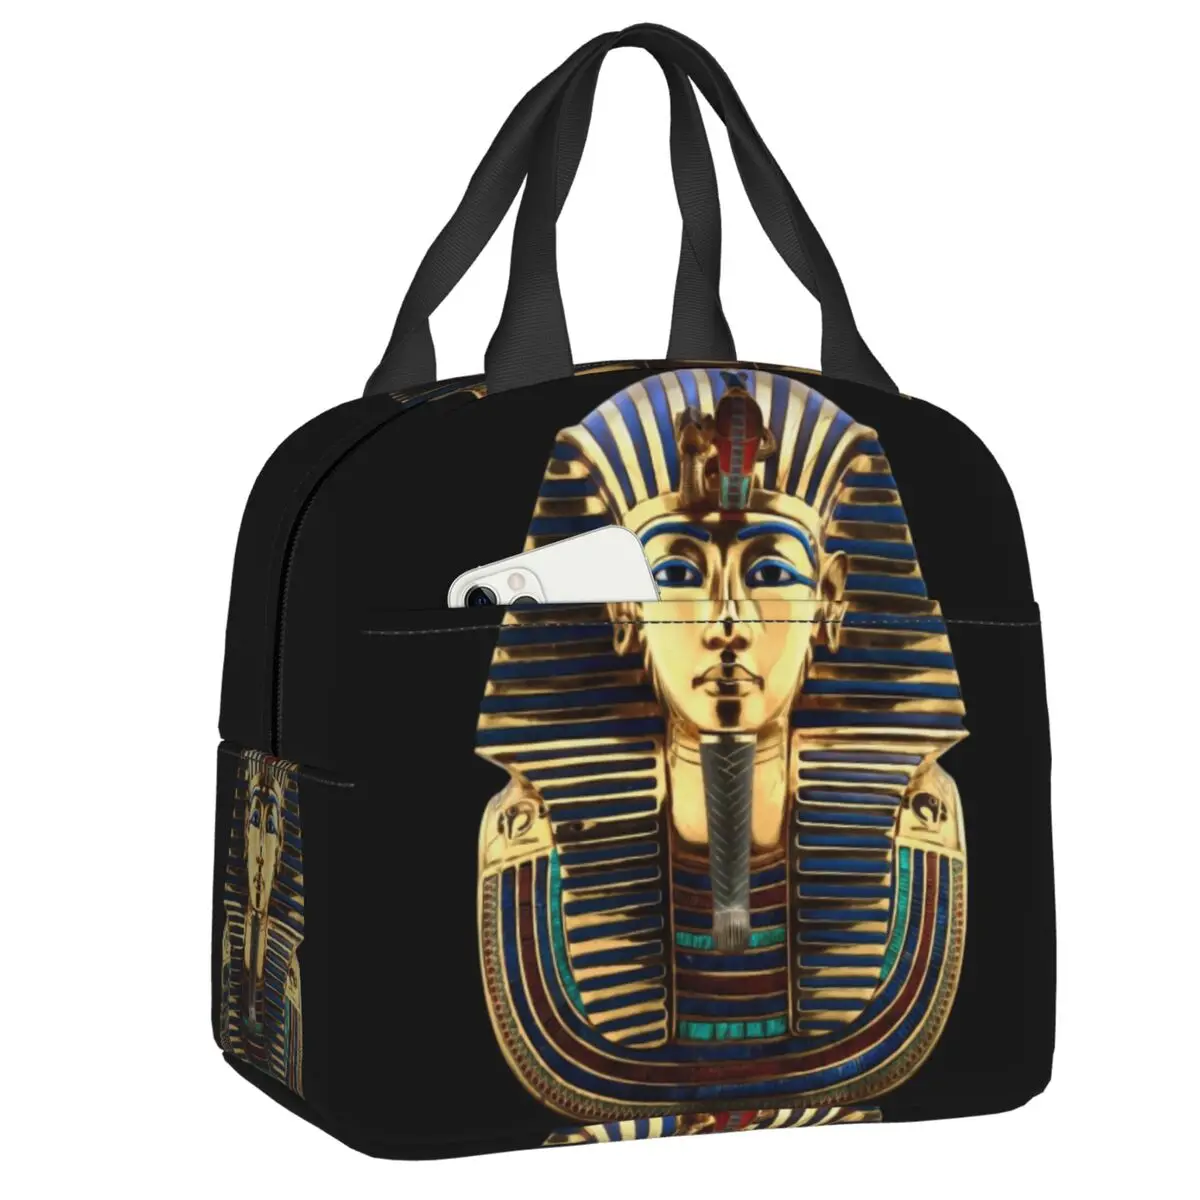 

Ancient Egypt Tutankhamun Pharaoh Insulated Lunch Bag for Women Resuable Egyptian King Tut Cooler Thermal Lunch Tote Work School